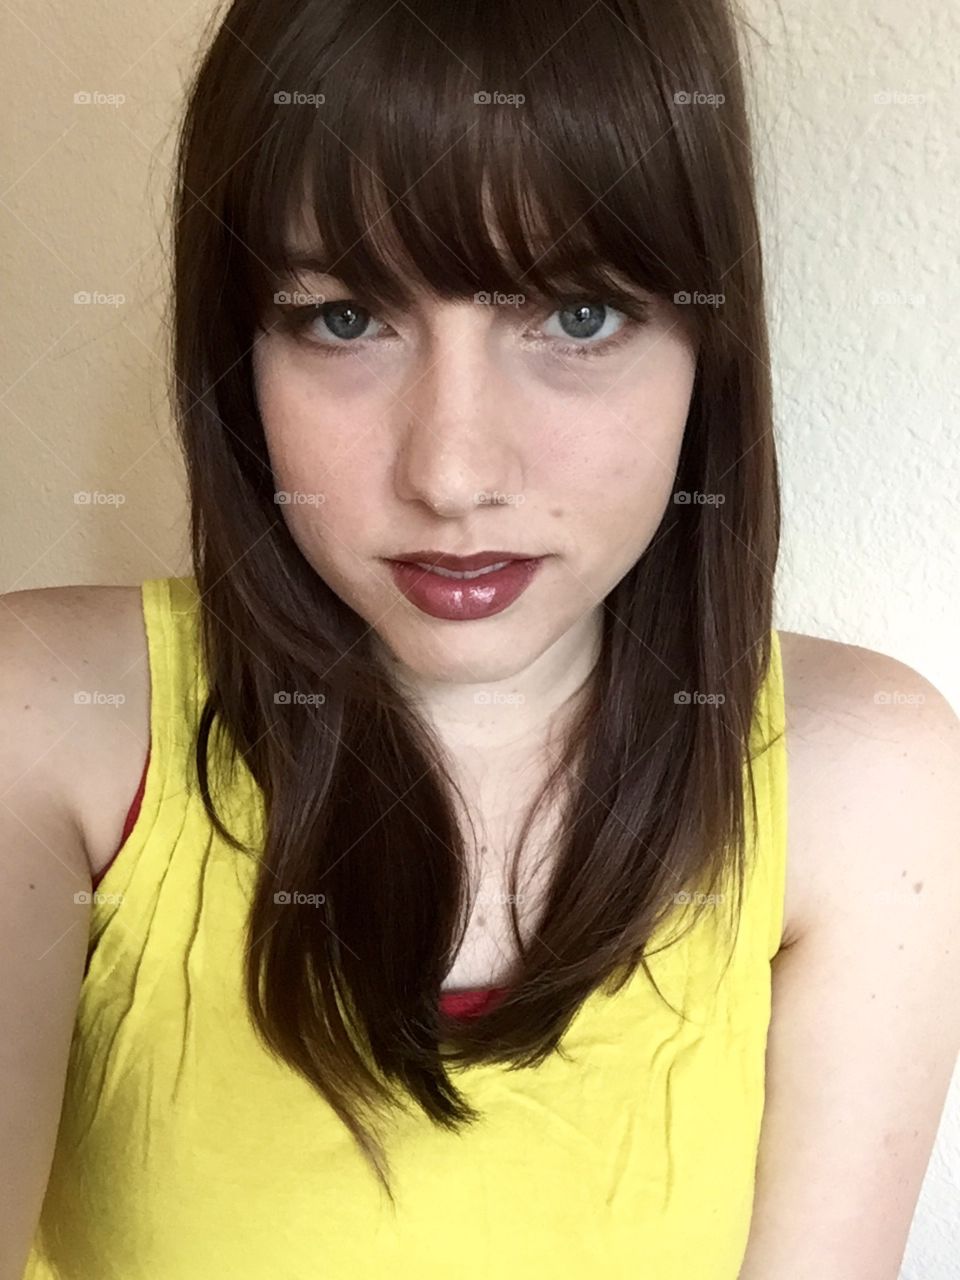 Cut my own bangs and felt good about it. Taken during my summer marketing internship in Colorado. I was 20 with blue eyes and a fair complexion.